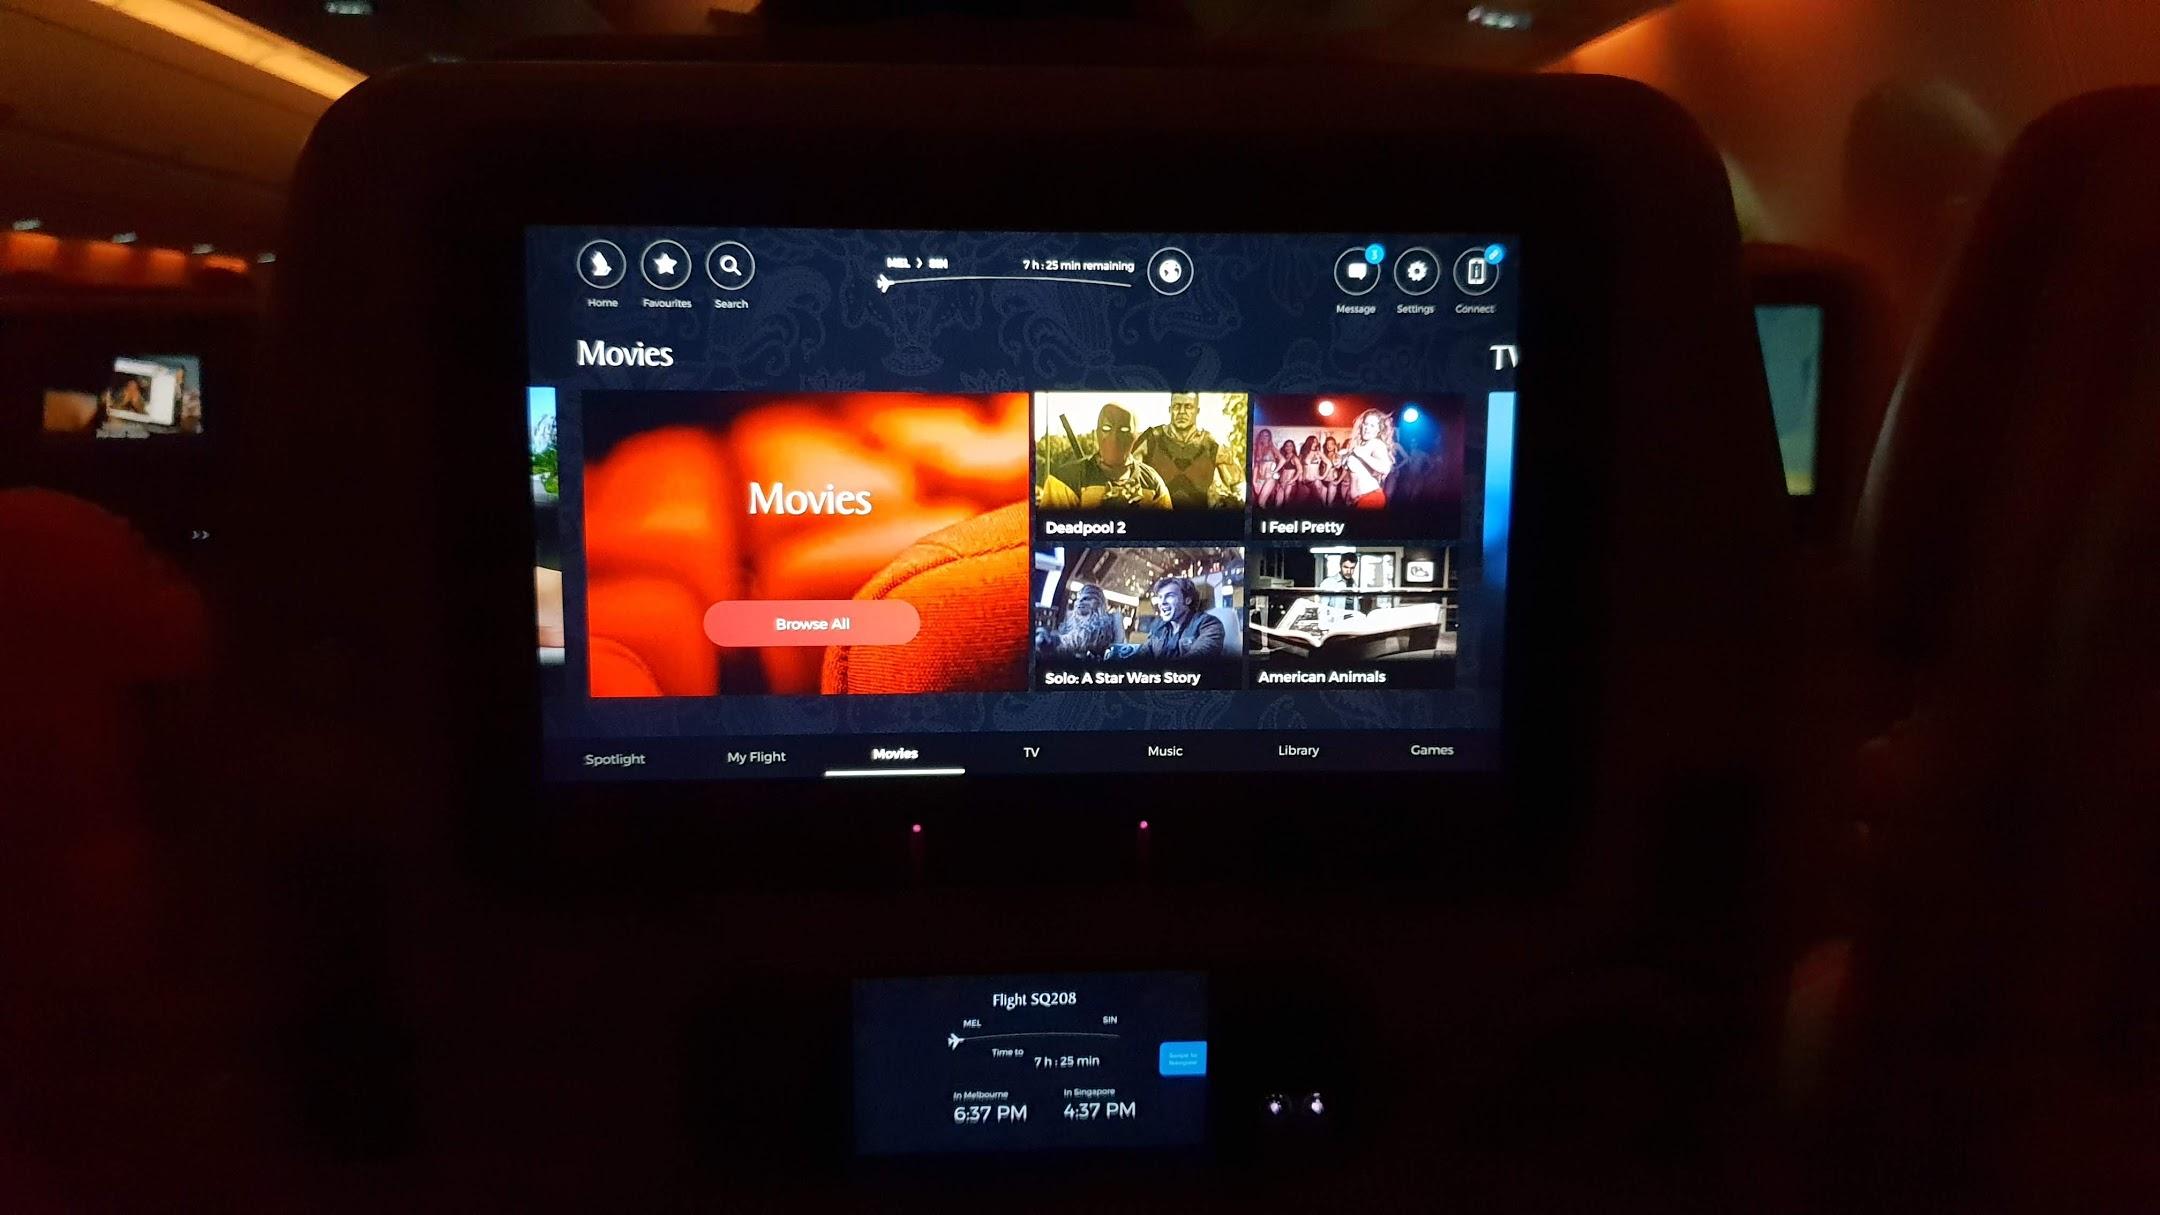 Singapore Airlines A350 Economy inflight entertainment screen